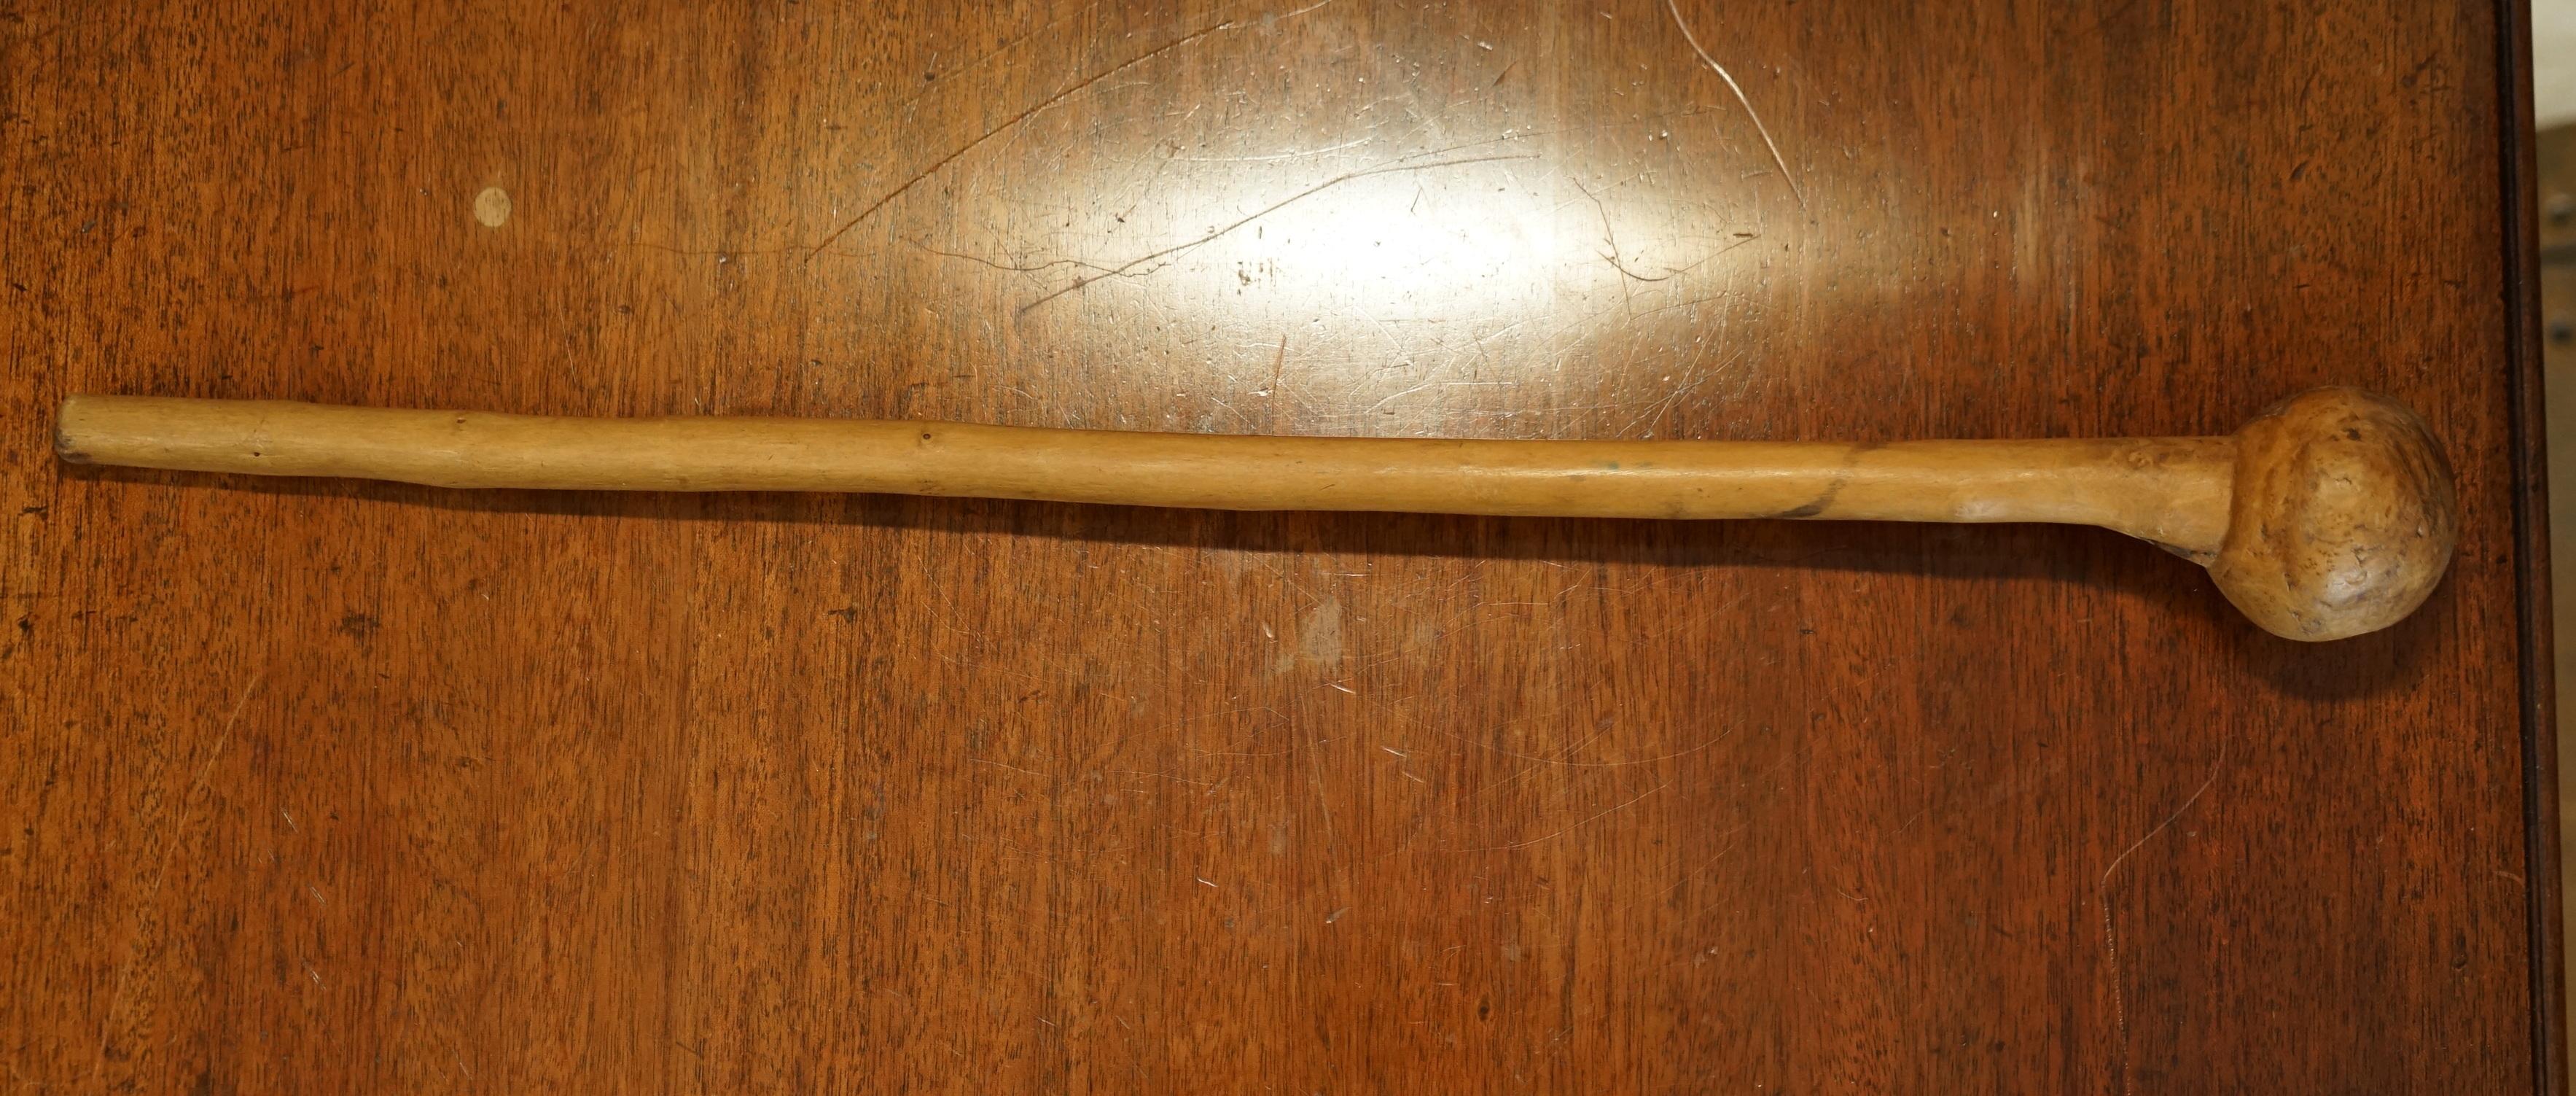 Fine Antique Irish Knobkerrie Stick Very Collectable and Primative One of Two For Sale 10